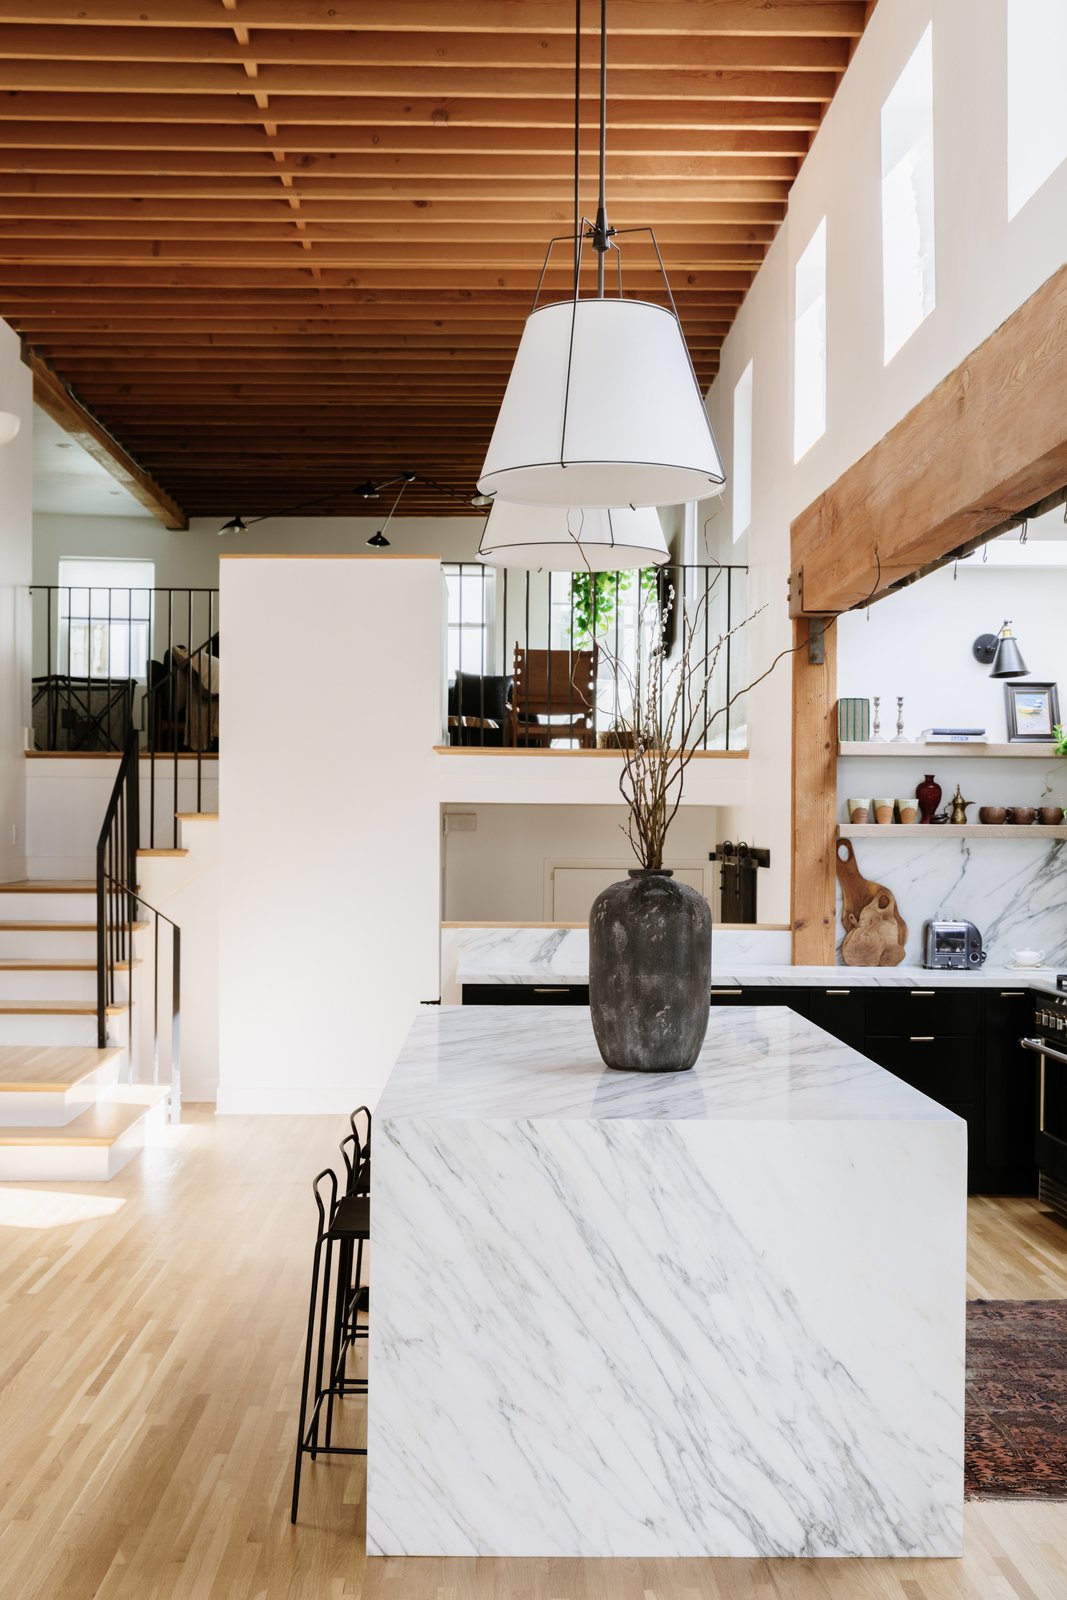 a soaring wood beamed atrium is an unexpected surprise upon entering the home the renovated kitchen features a large marble island that visually grounds the space